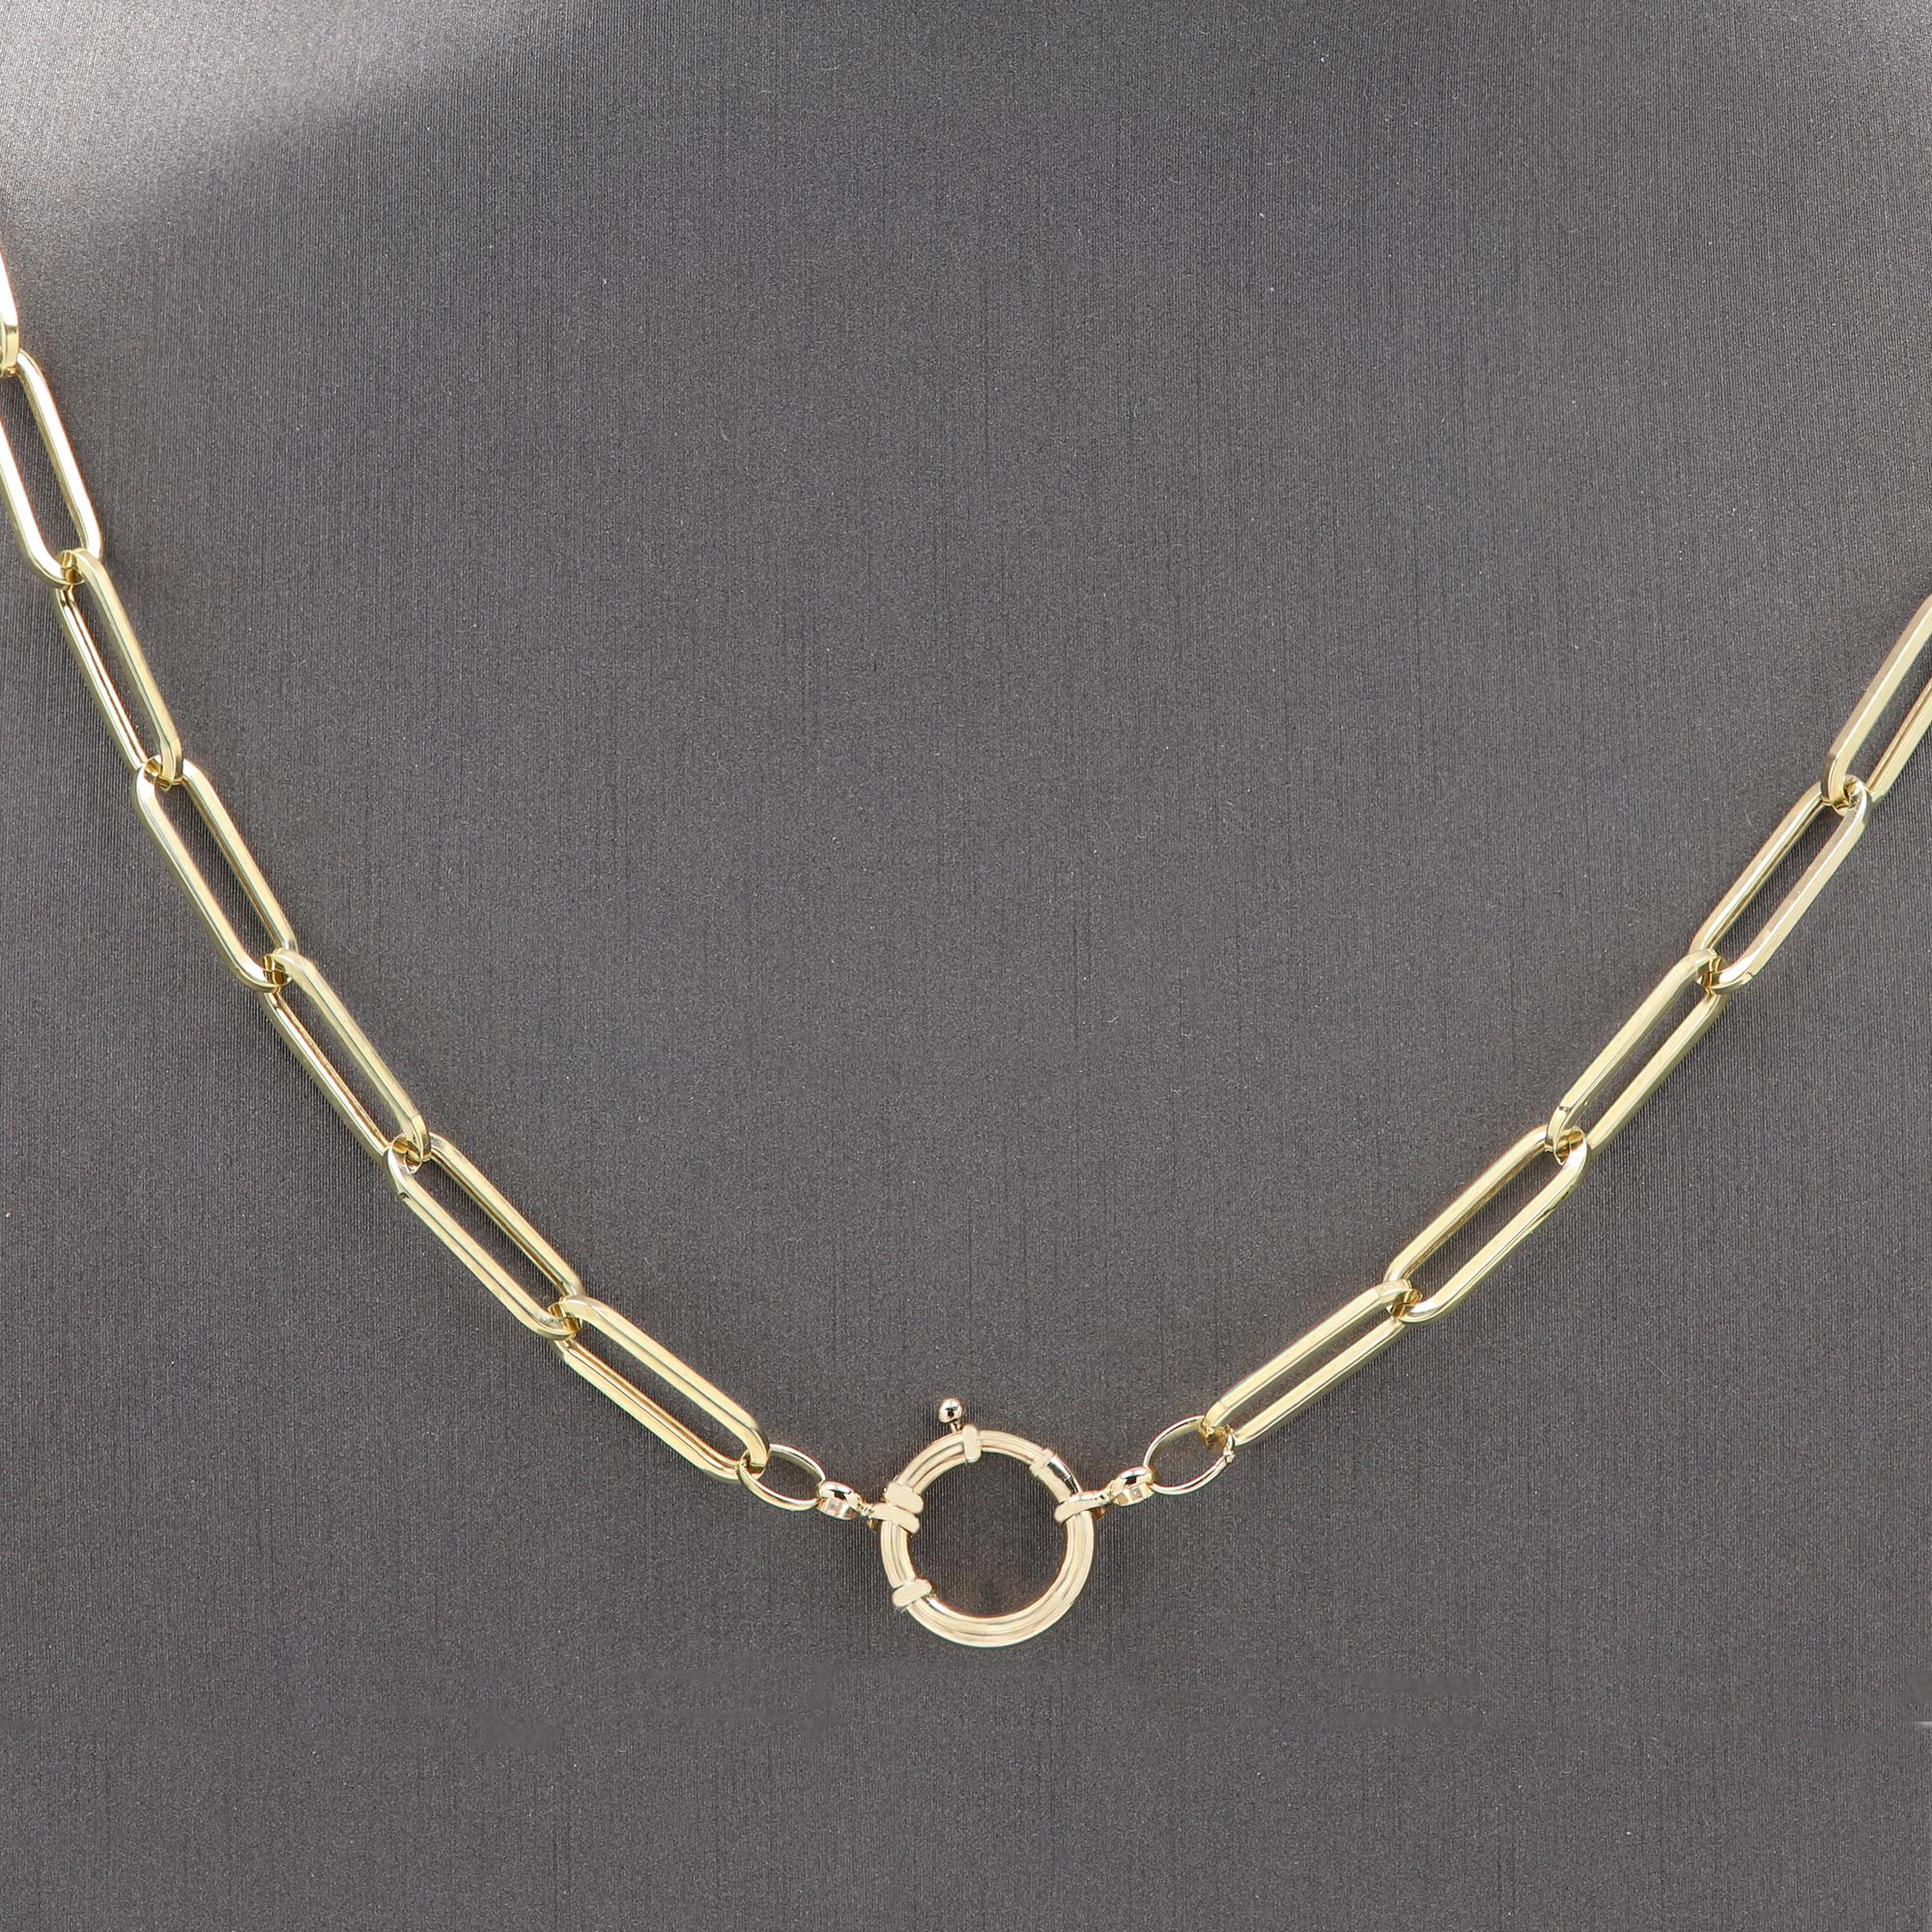 Enhancer Paperclip Necklace Chain 14 Karat Gold Italian with Front Spring Lock In New Condition For Sale In Brooklyn, NY